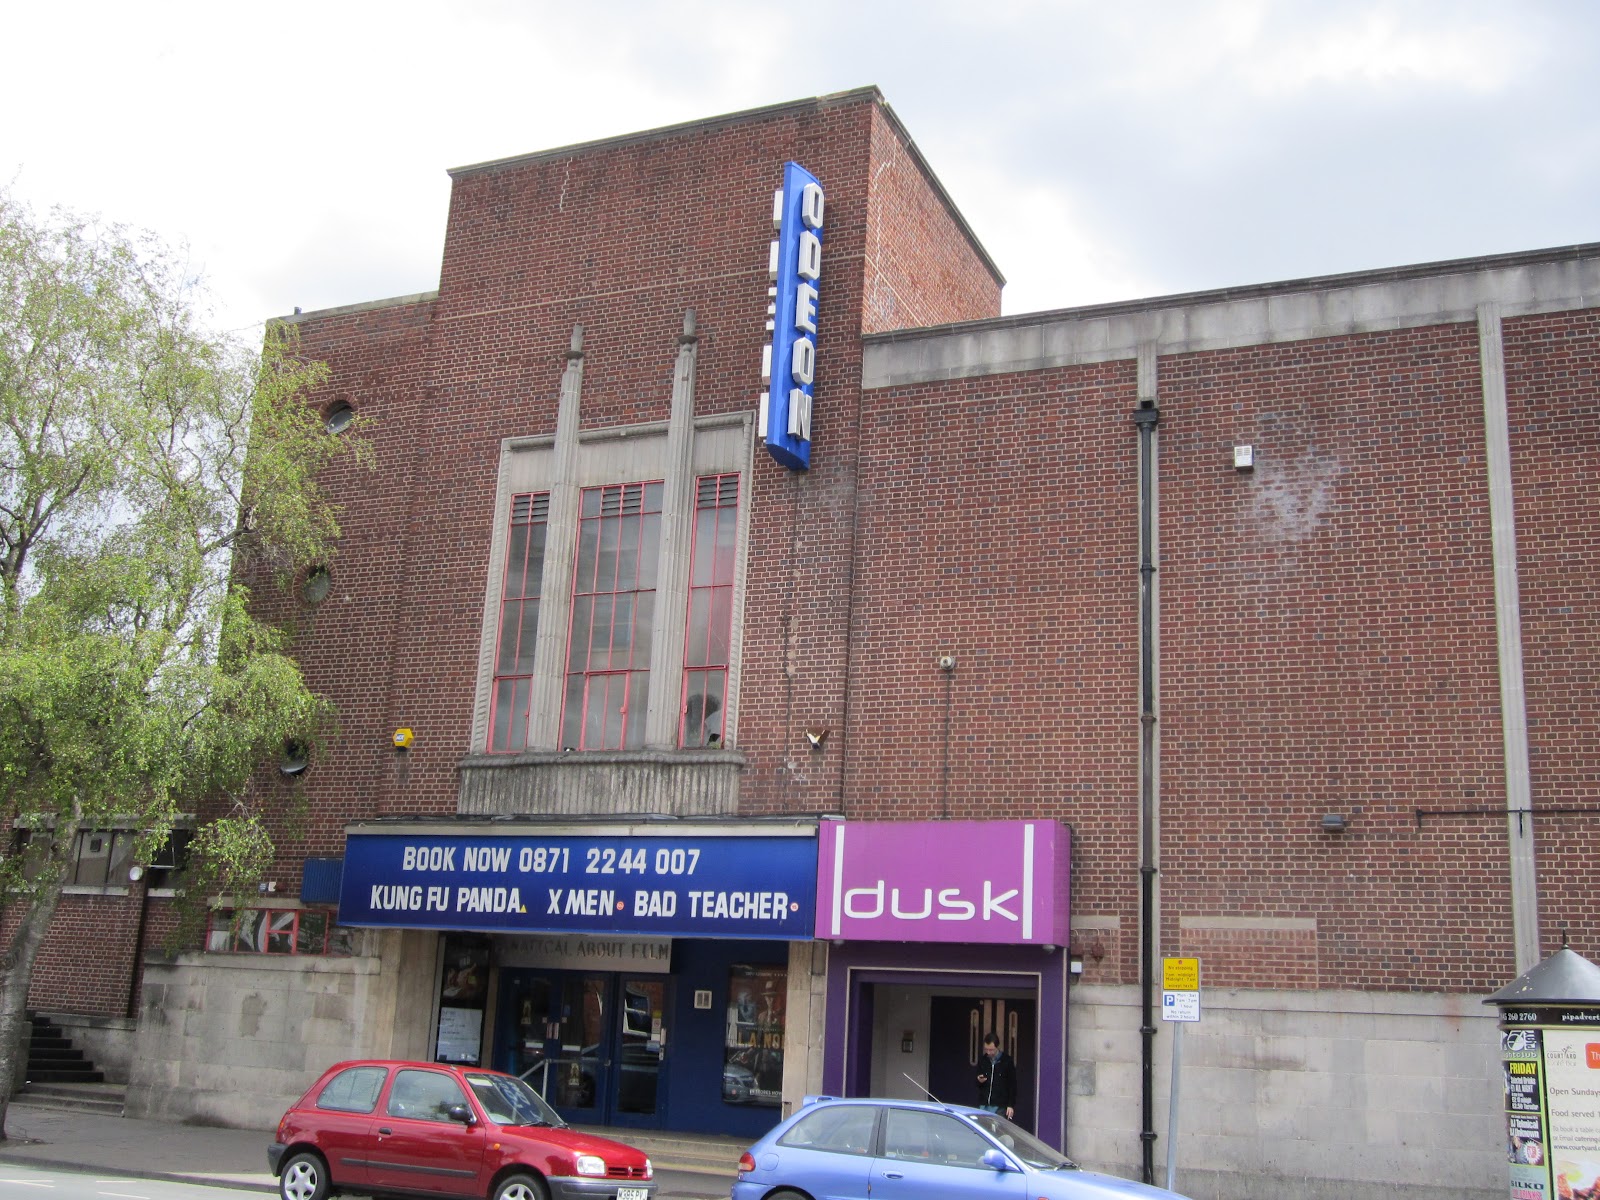 Pictureville: Odeon multiplex features in Hereford's new Old Market